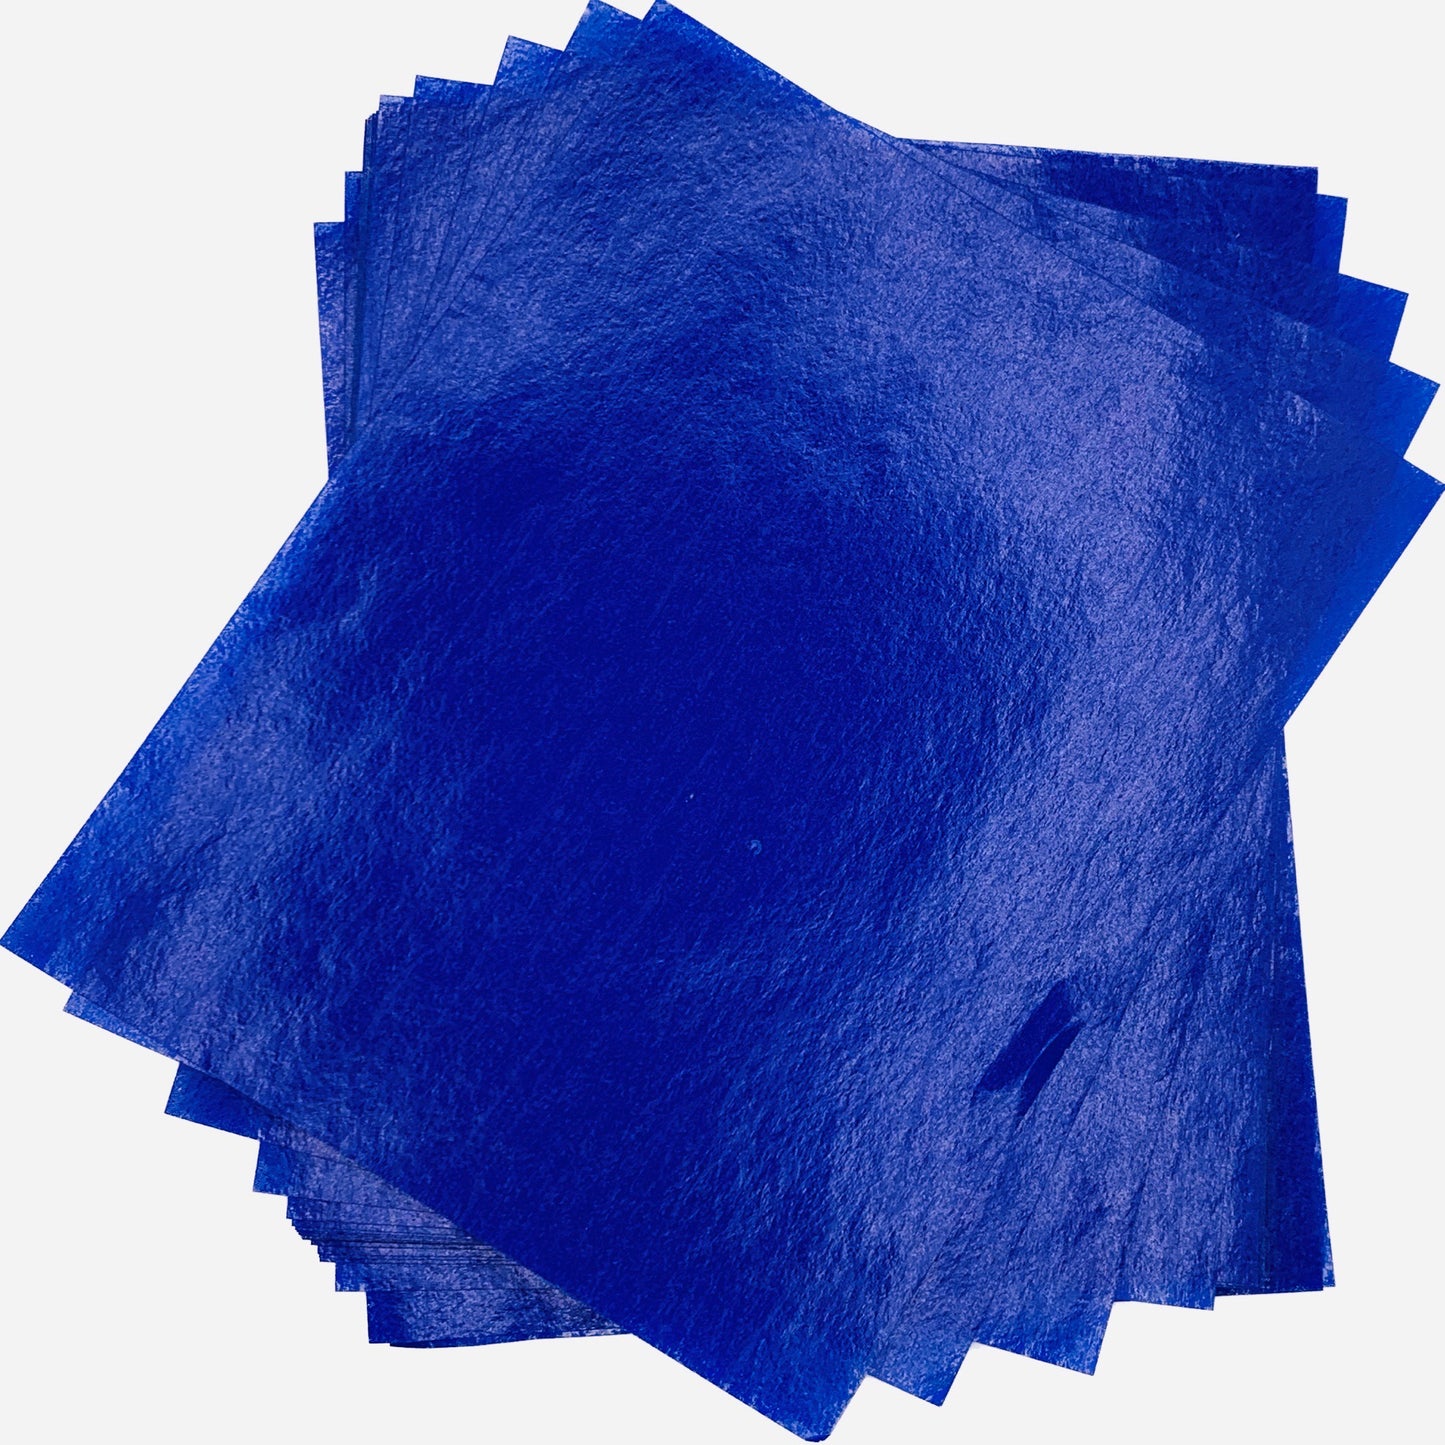 Blue Wax Caramel Candy Wrappers